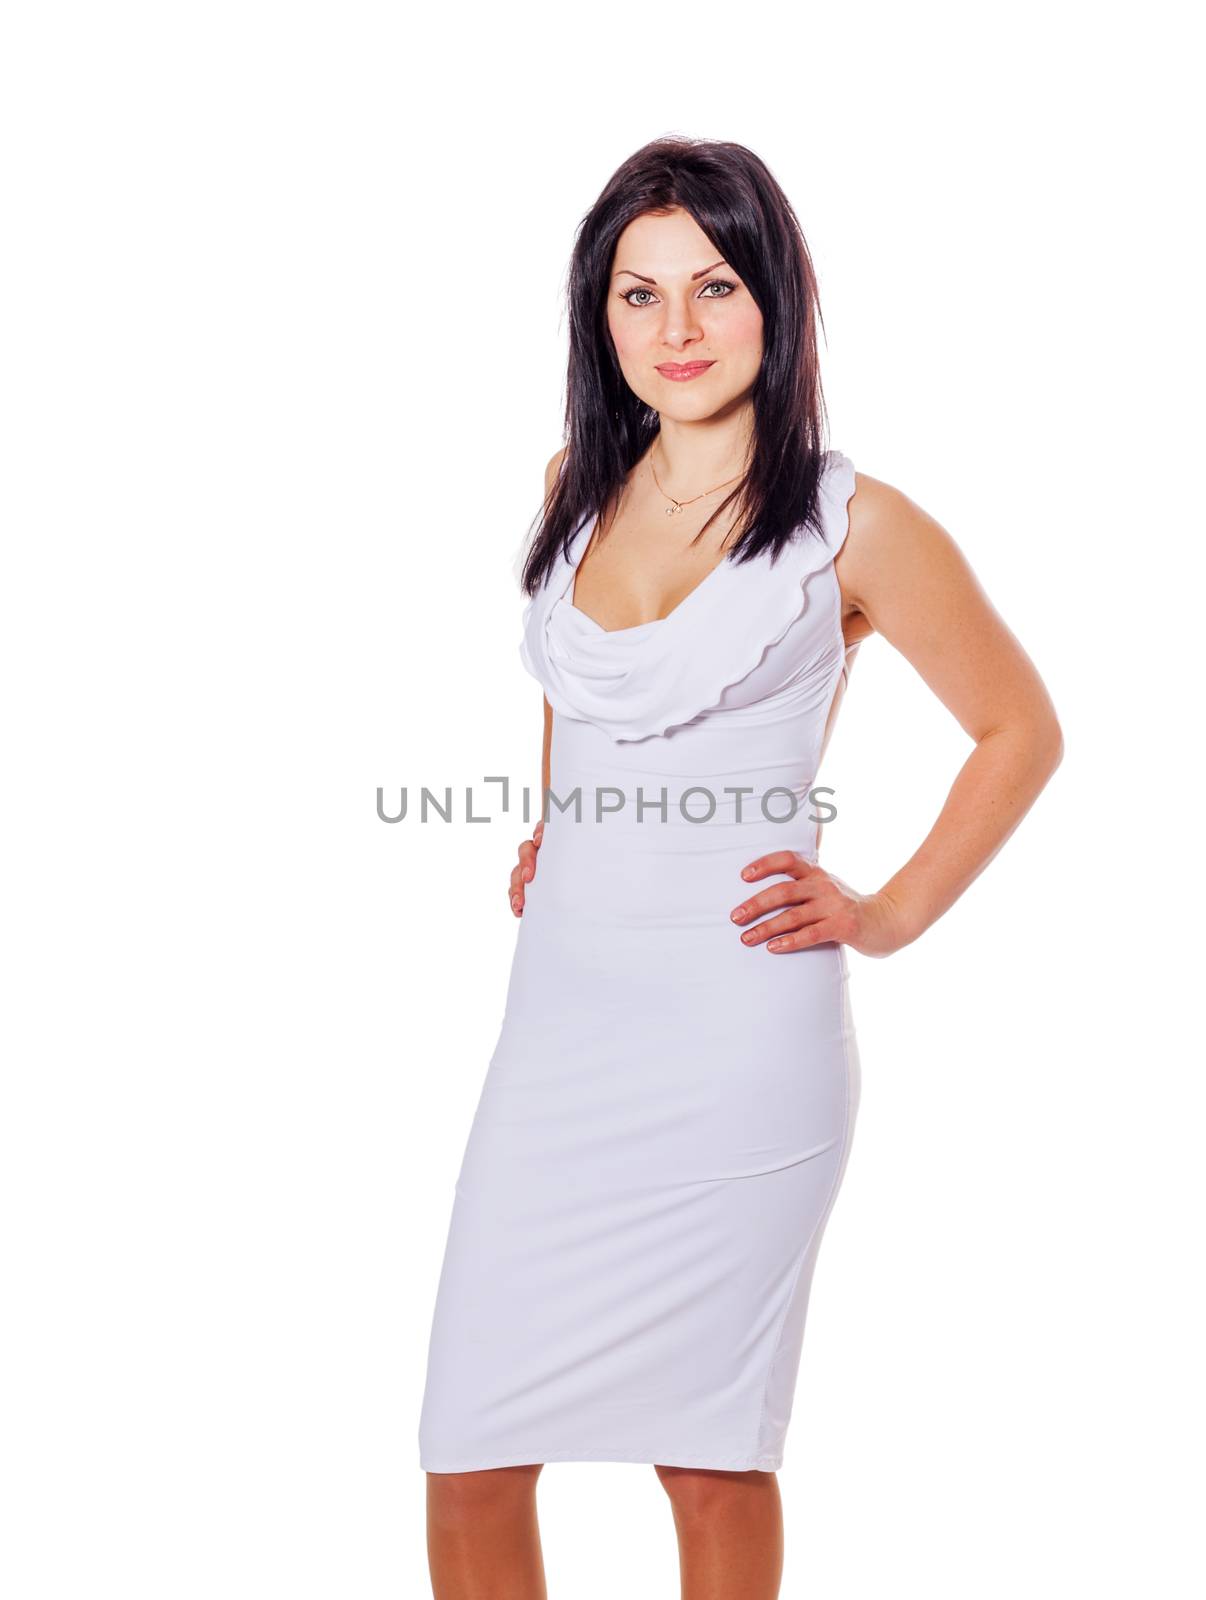 Elegant young woman posing against a white background